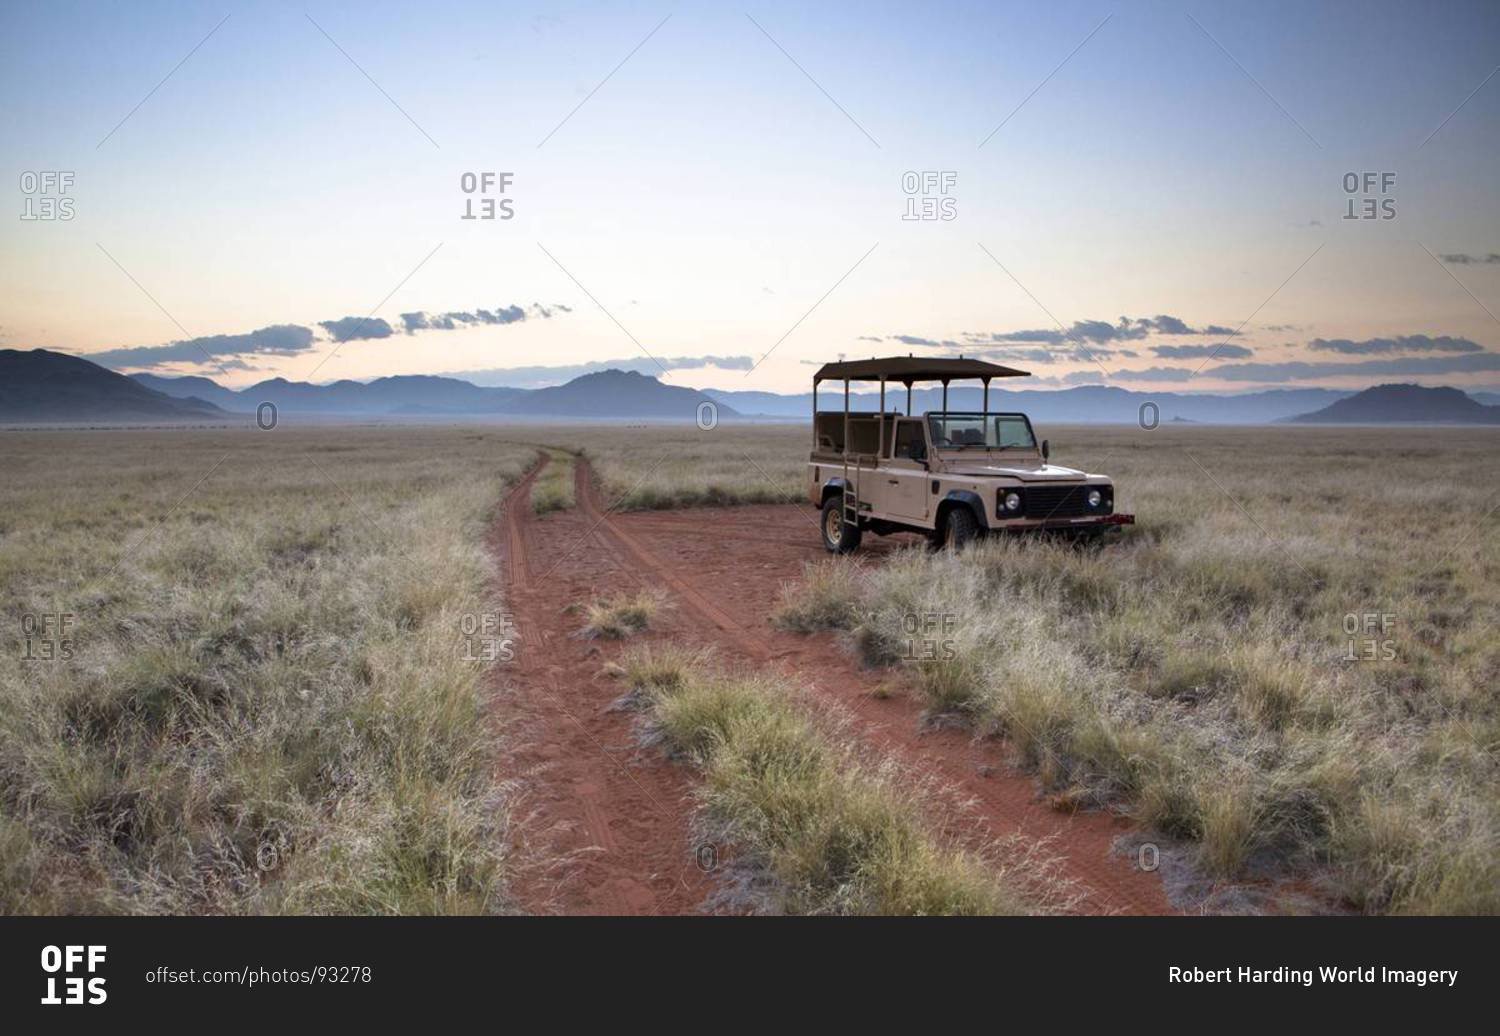 Land Rover game vehicle parked by sand road at sunrise, Namib Rand game reserve, Namib Naukluft Park, Namibia, Africa